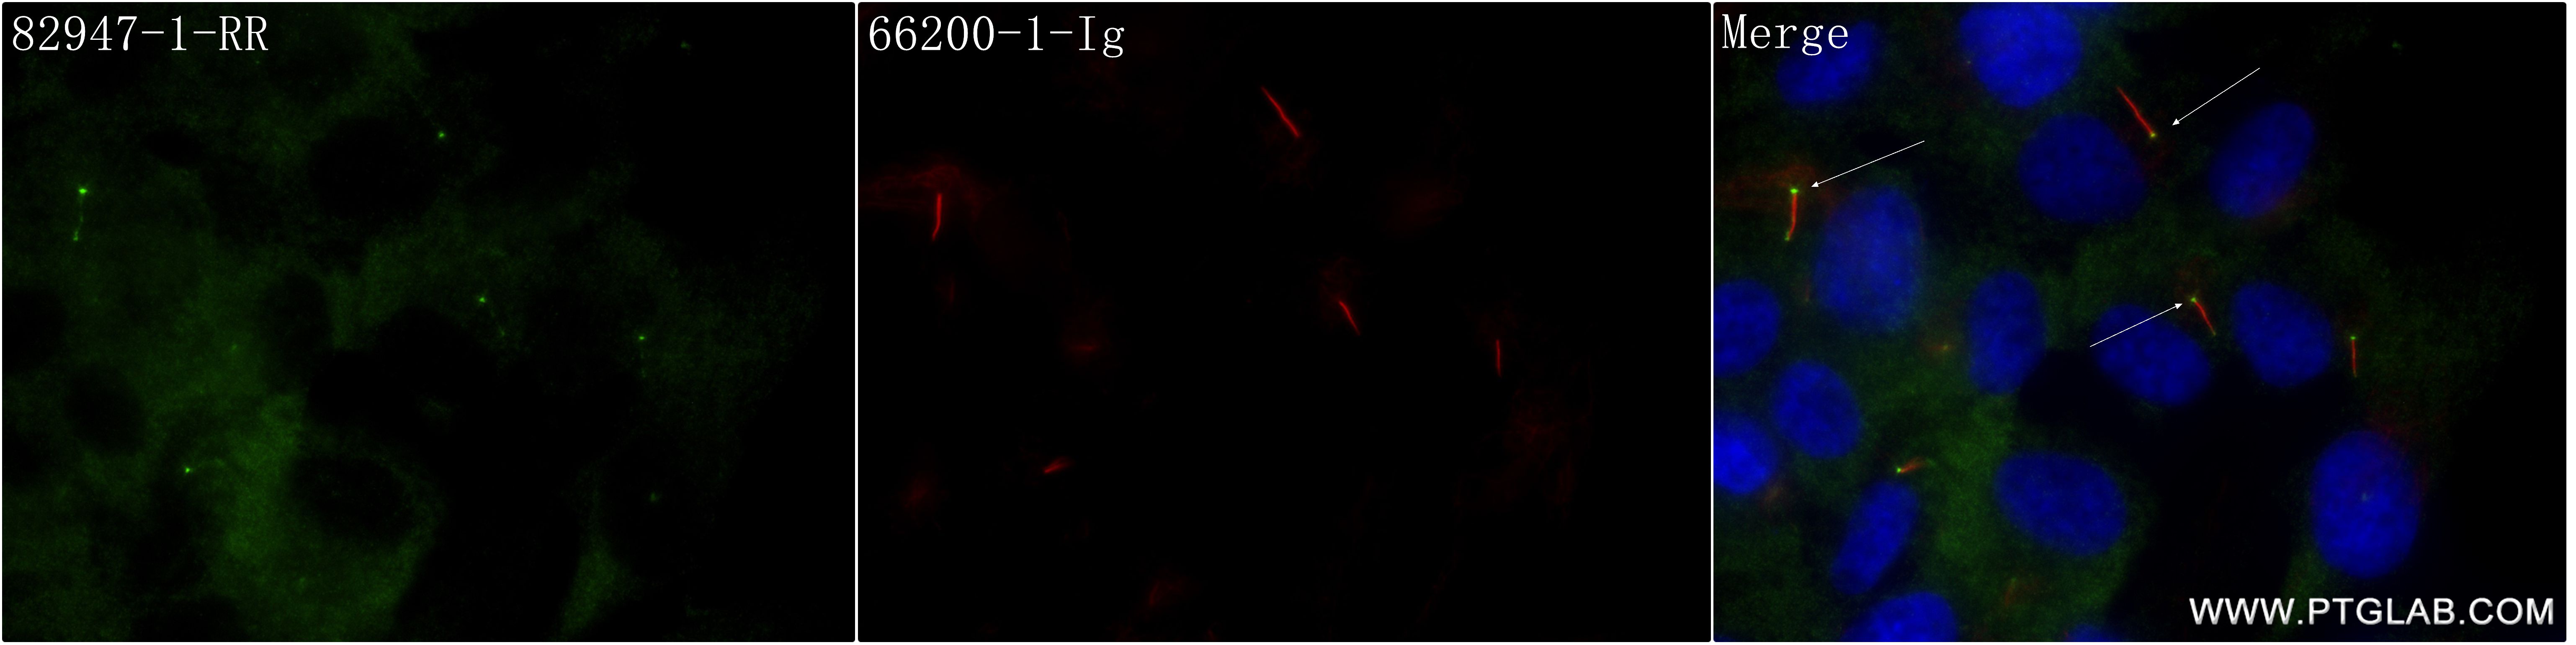 IF Staining of hTERT-RPE1 using 82947-1-RR